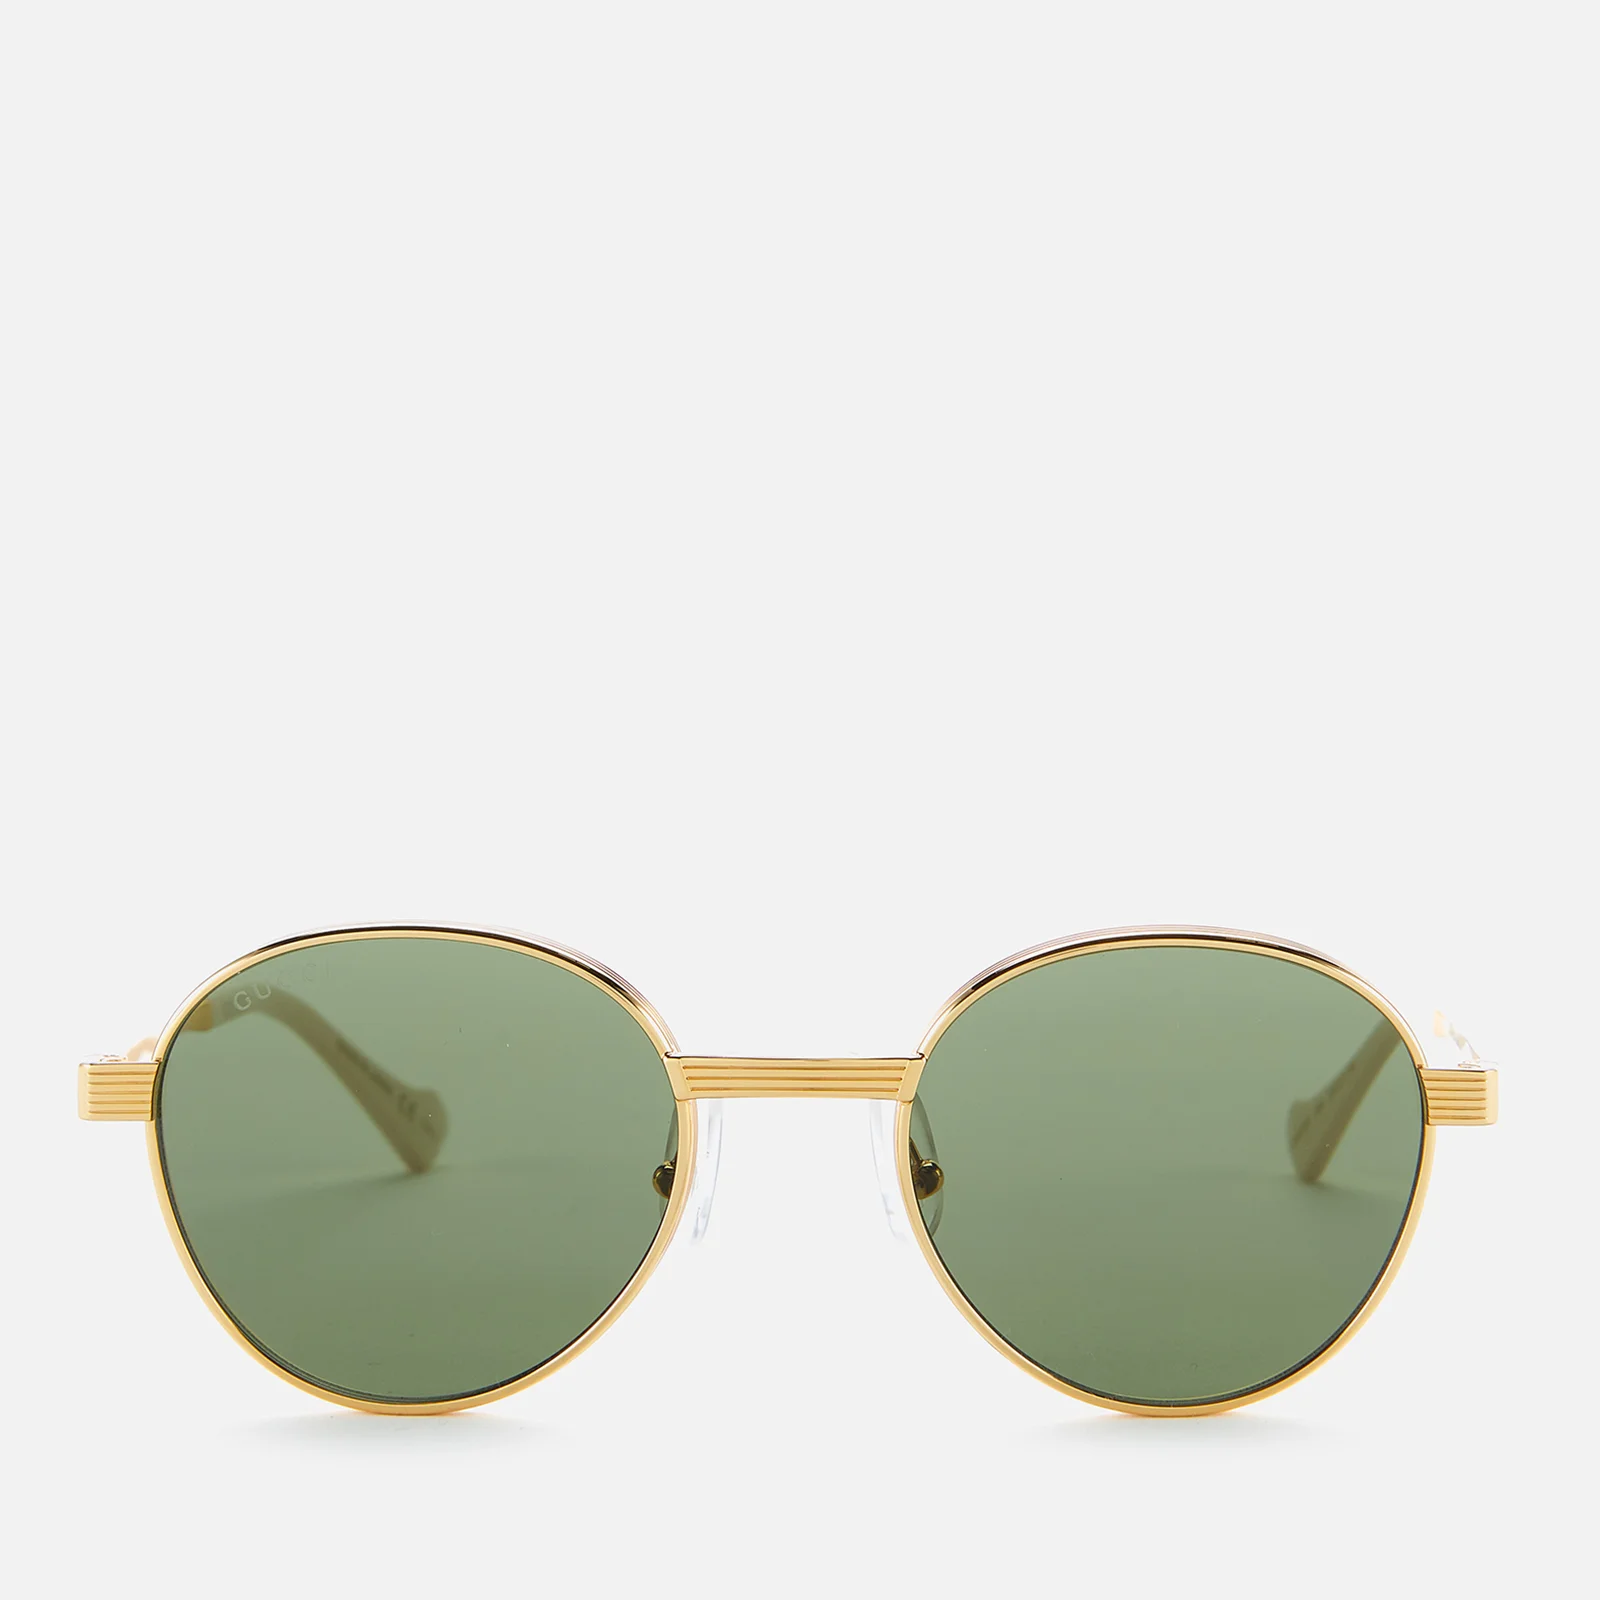 Gucci Men's Rounded Metal Sunglasses - Gold/Green Image 1